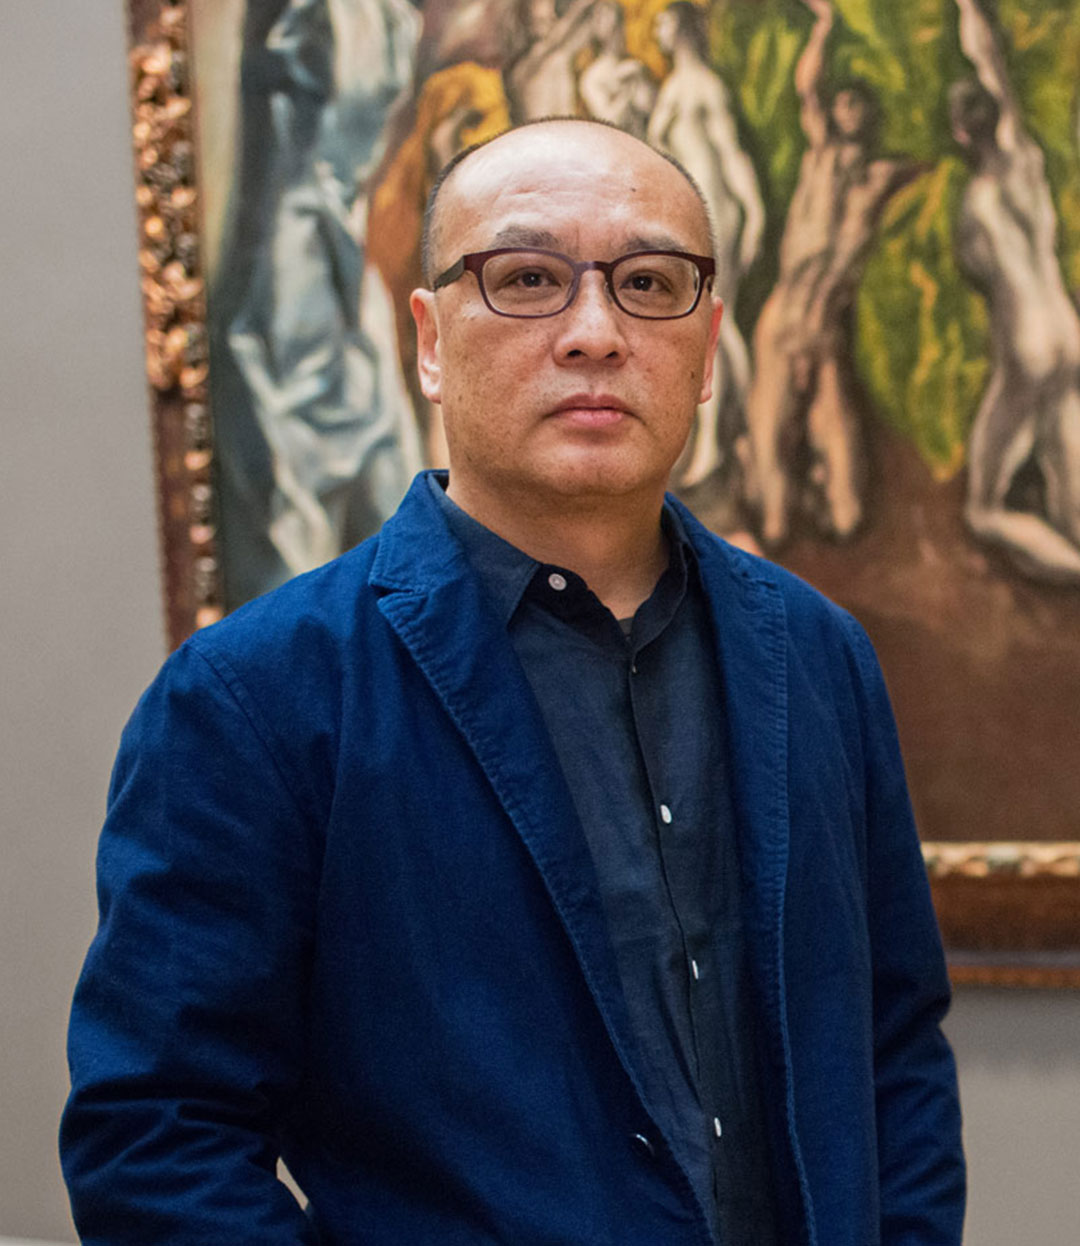 Zhang Xiaogang beside The Vision of Saint John (c. 1609–14) by El Greco, as featured in The Artist Project